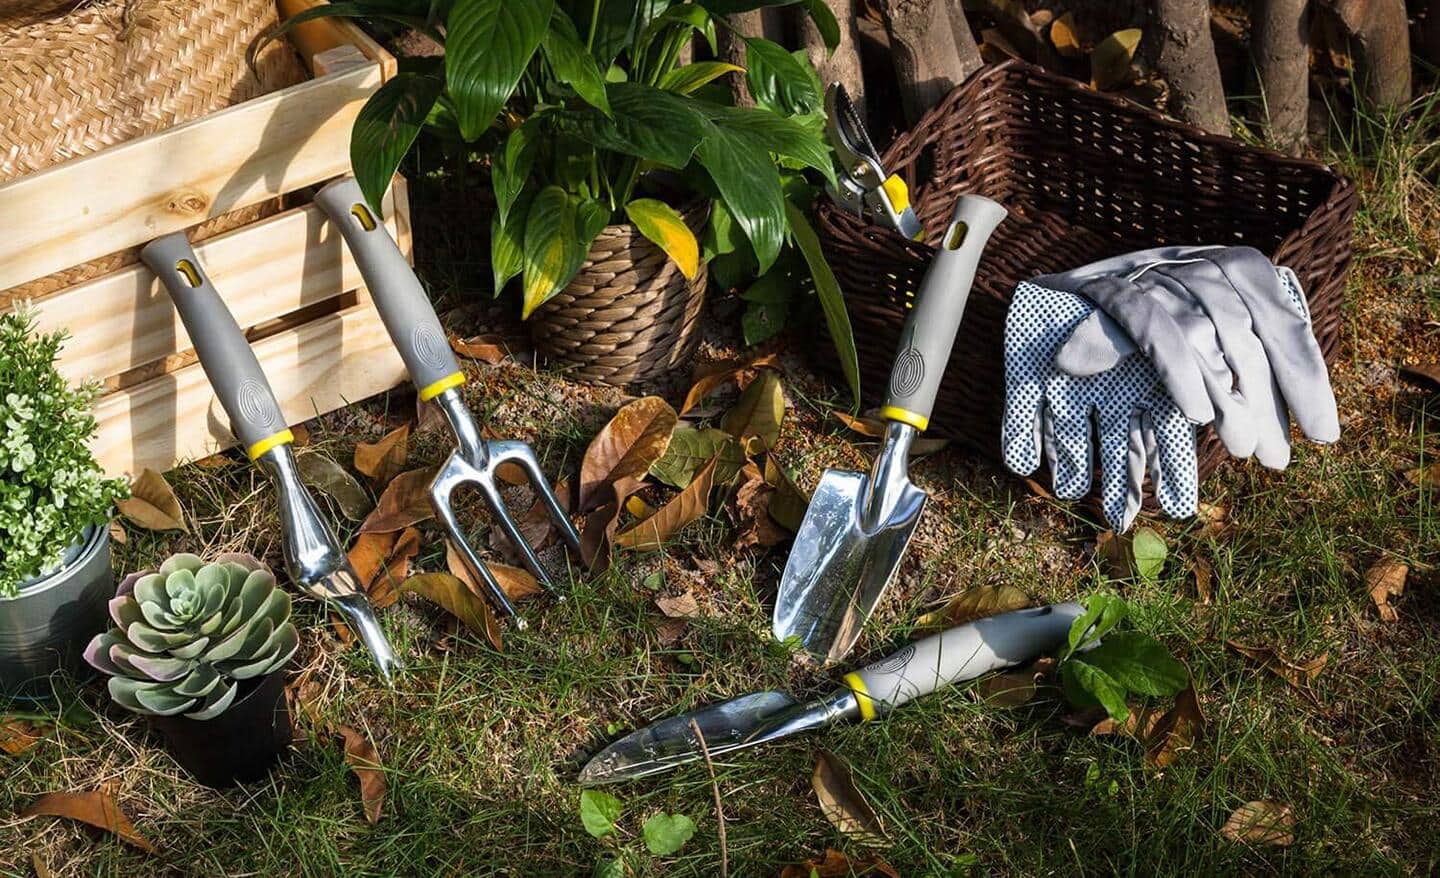 Types of garden tools including weeders on garden soil with gloves